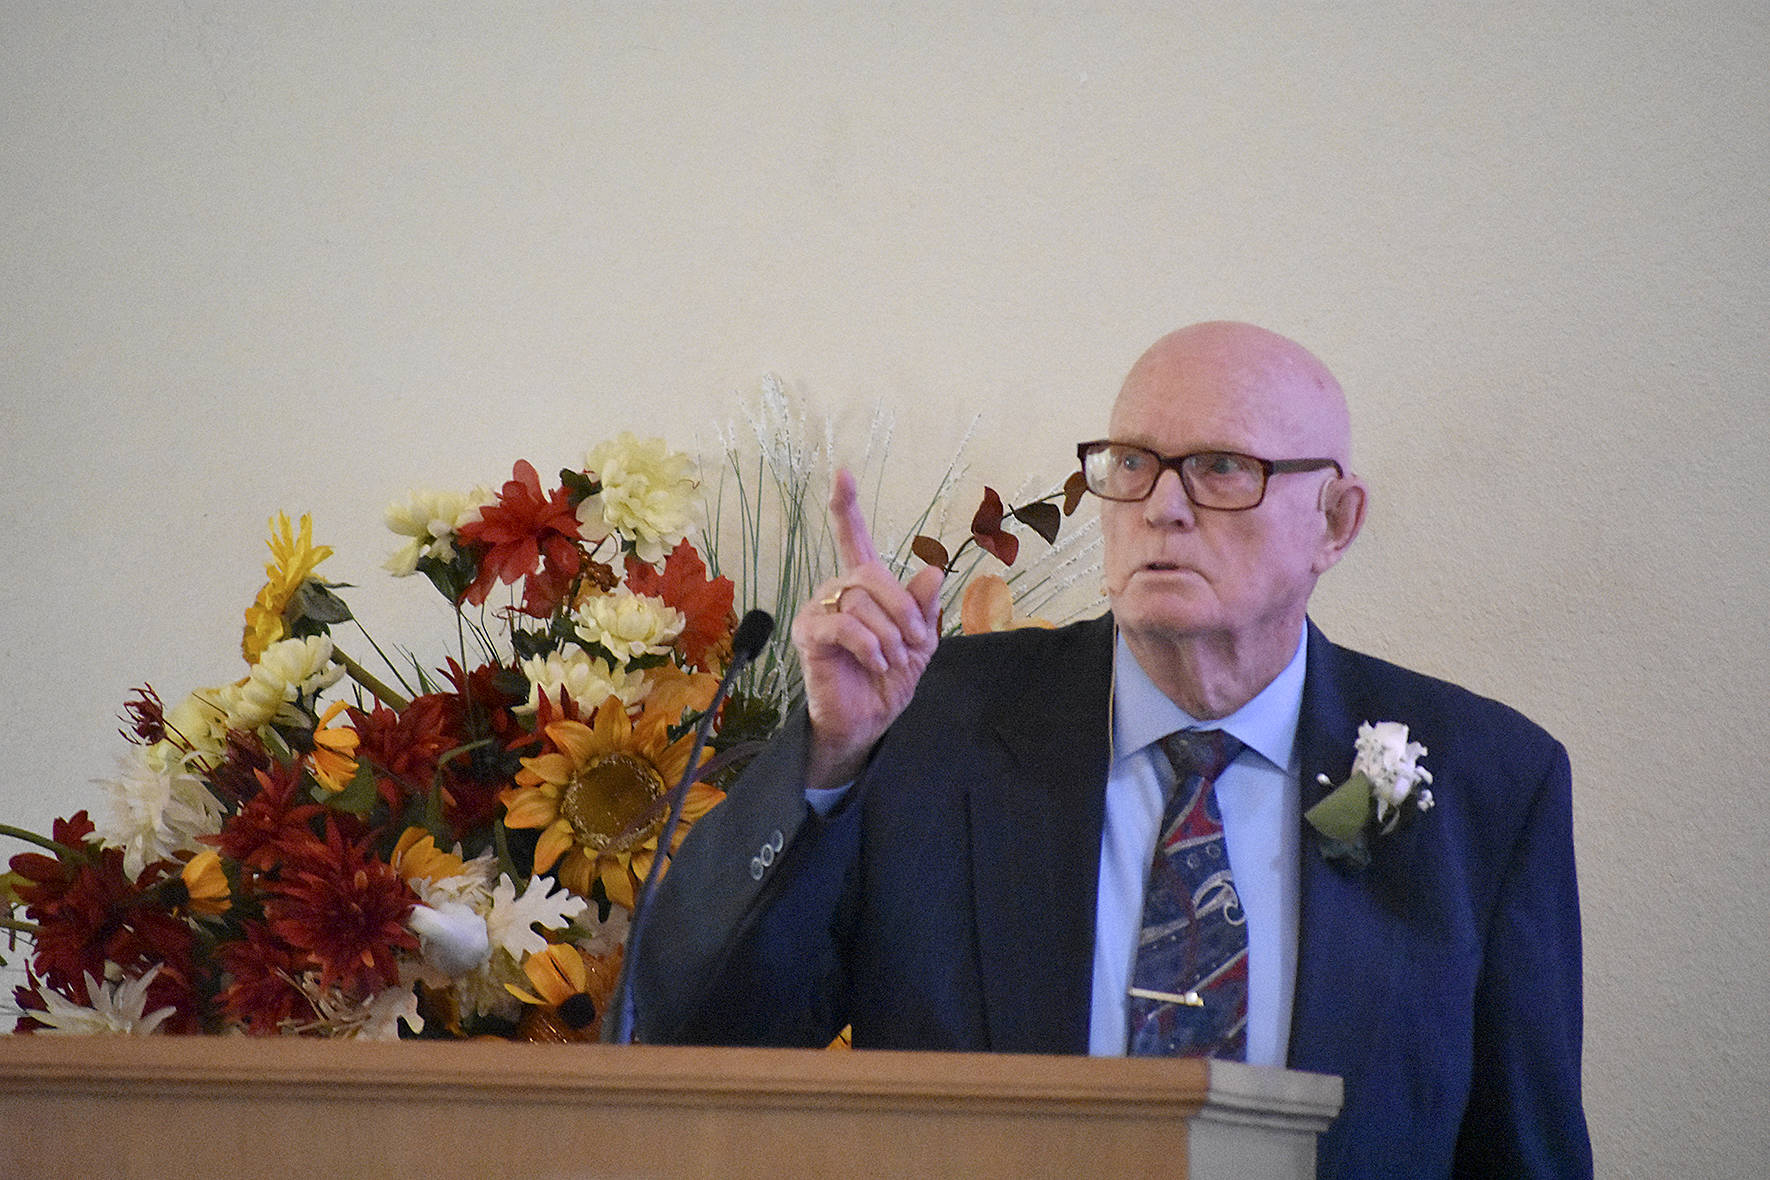 Photo by Haley Ausbun. Garth Smith’s “final” sermon at Springbrook Church of Christ, Sunday, Oct. 13. At 90, he has been devoted to his faith, as well as his marriage, for over 70 years.